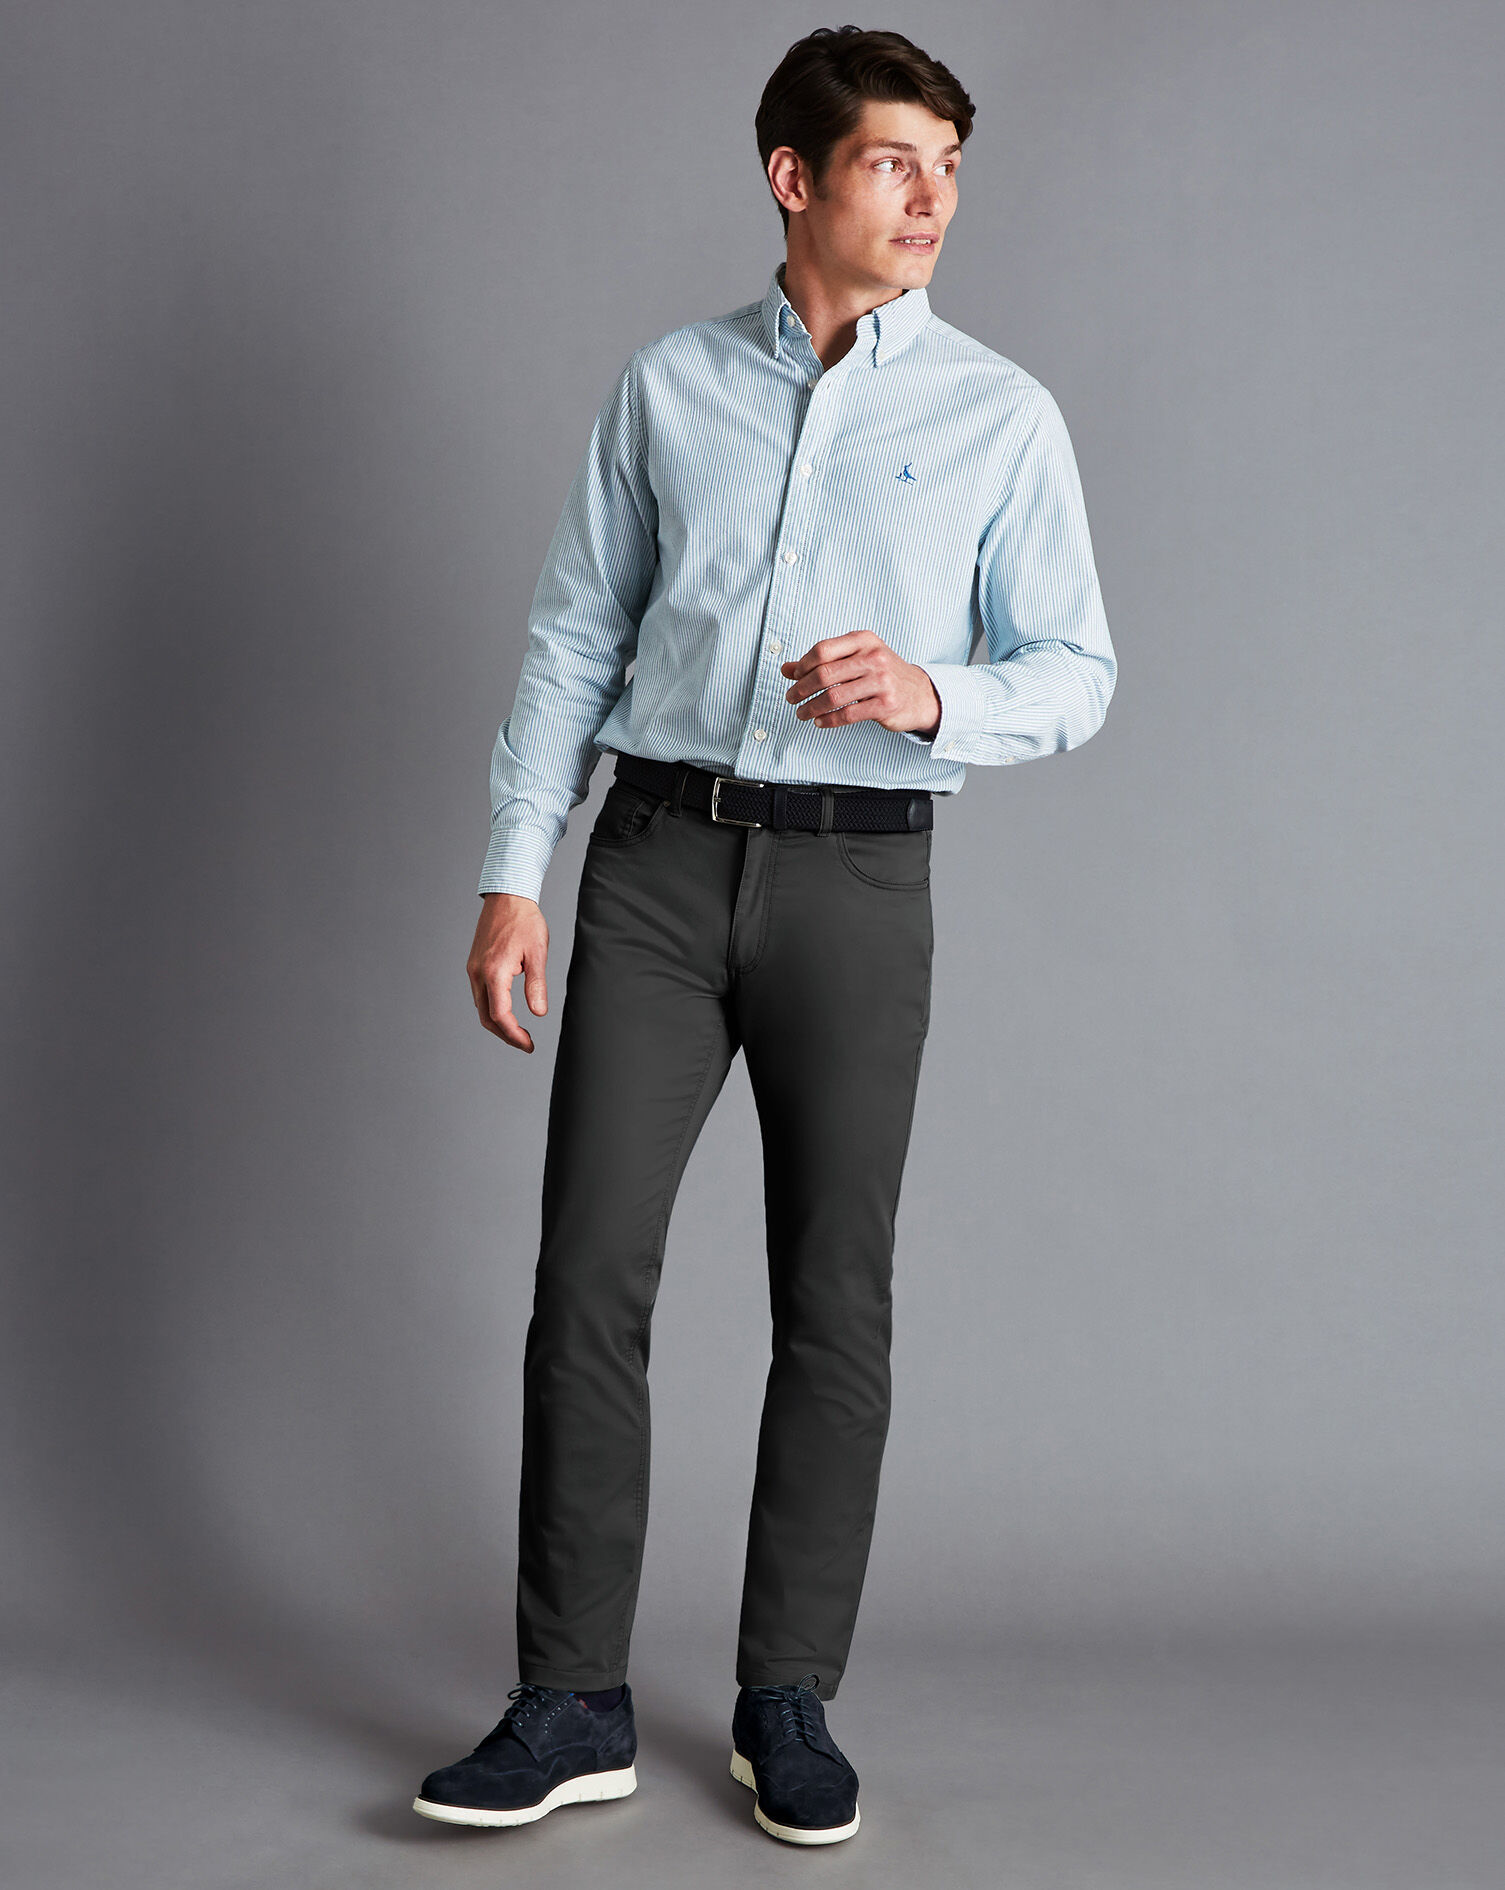 7 Shirt Colors To Wear With Grey Pants And Brown Shoes  Ready Sleek